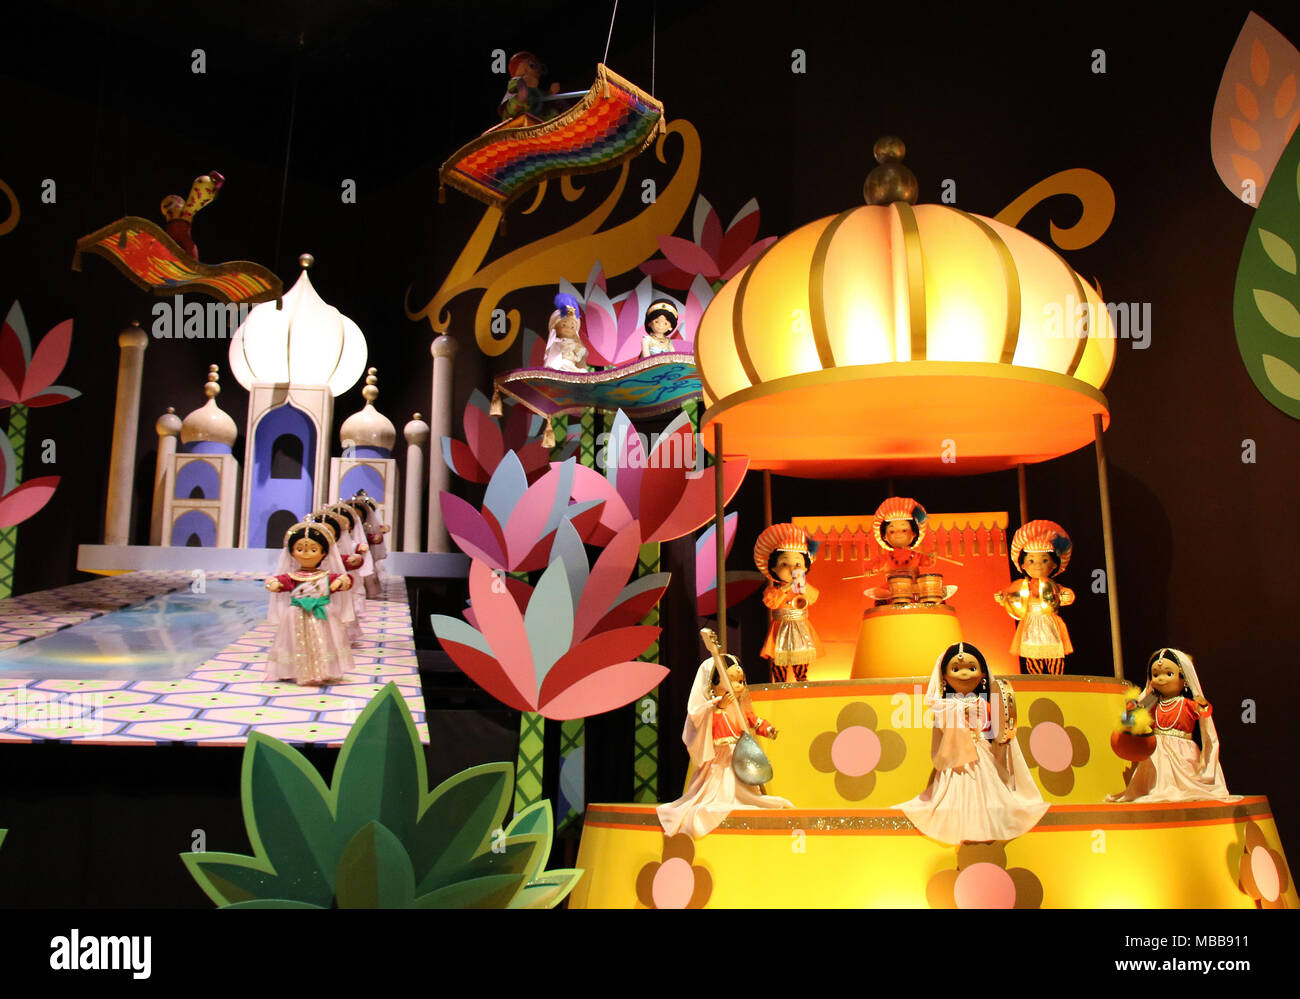 Urayasu Japan 10th Apr 18 This Picture Shows Tokyo Disneyland S Attraction It S A Small World As The Attraction Was Renewed And Opened For The Press At The Tokyo Disneyland In Urayasu Suburban